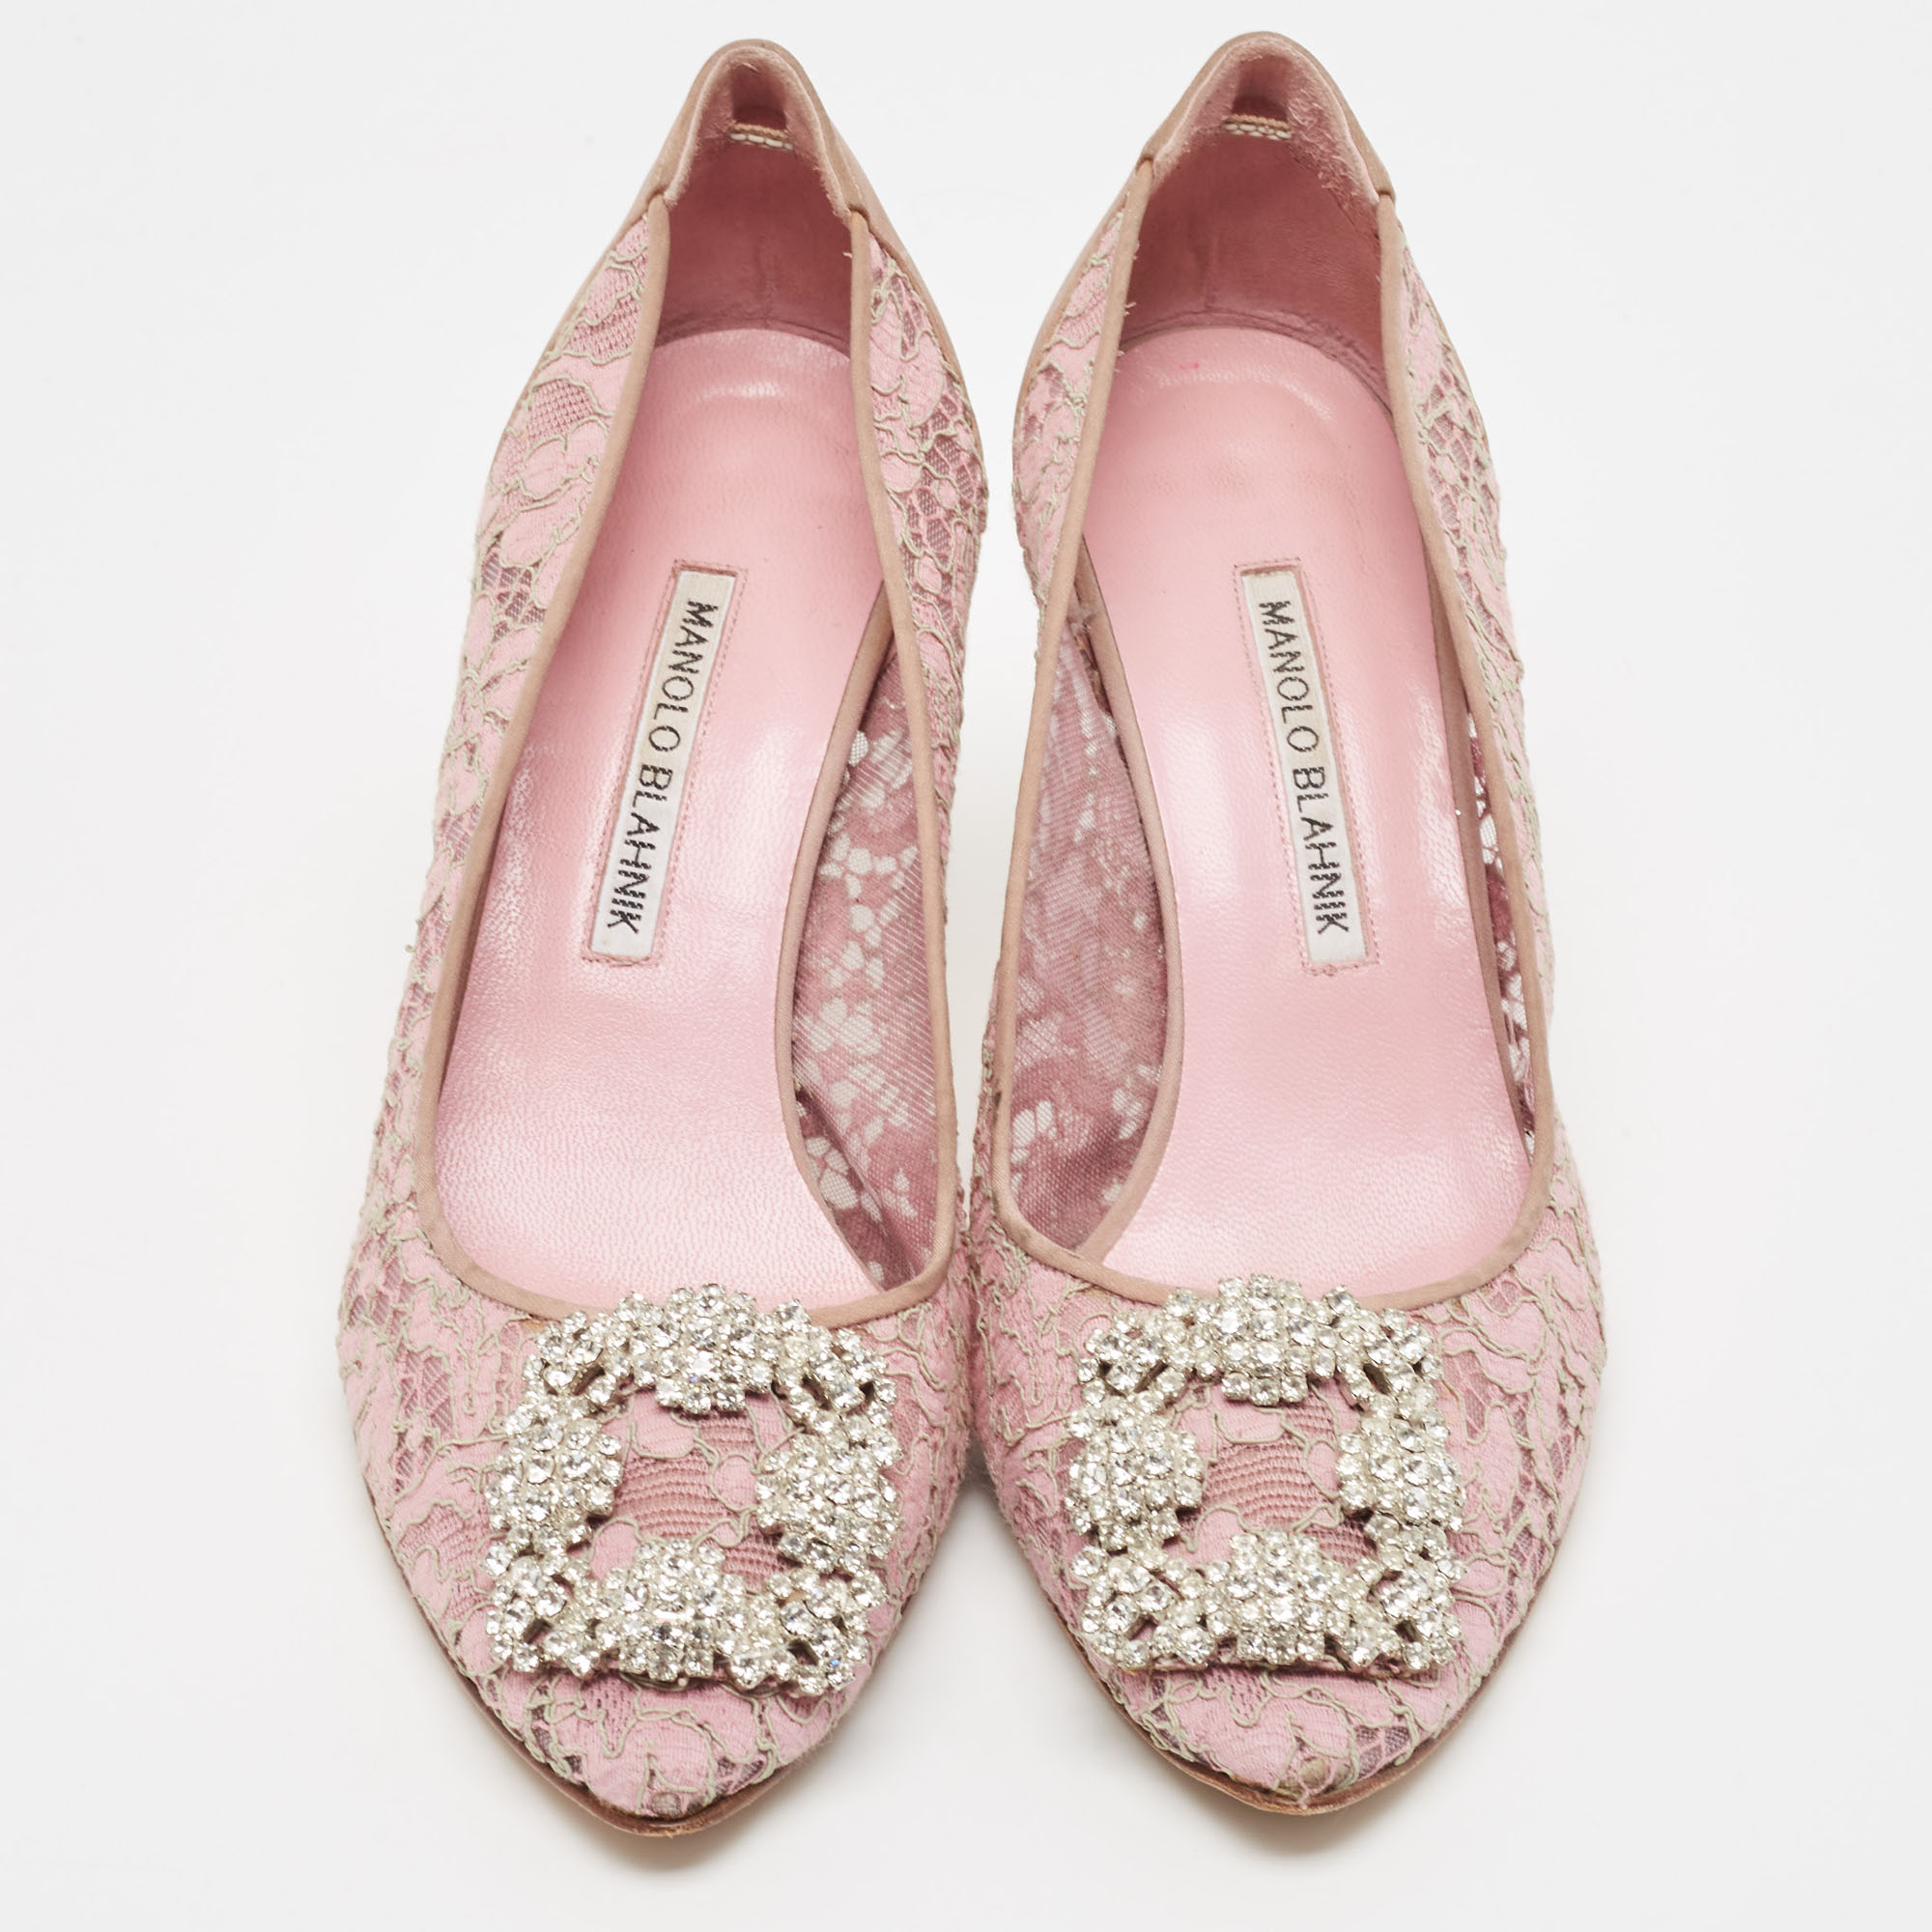 Manolo Blahnik Pink Lace And Mesh Hangisi Pumps Size 38.5